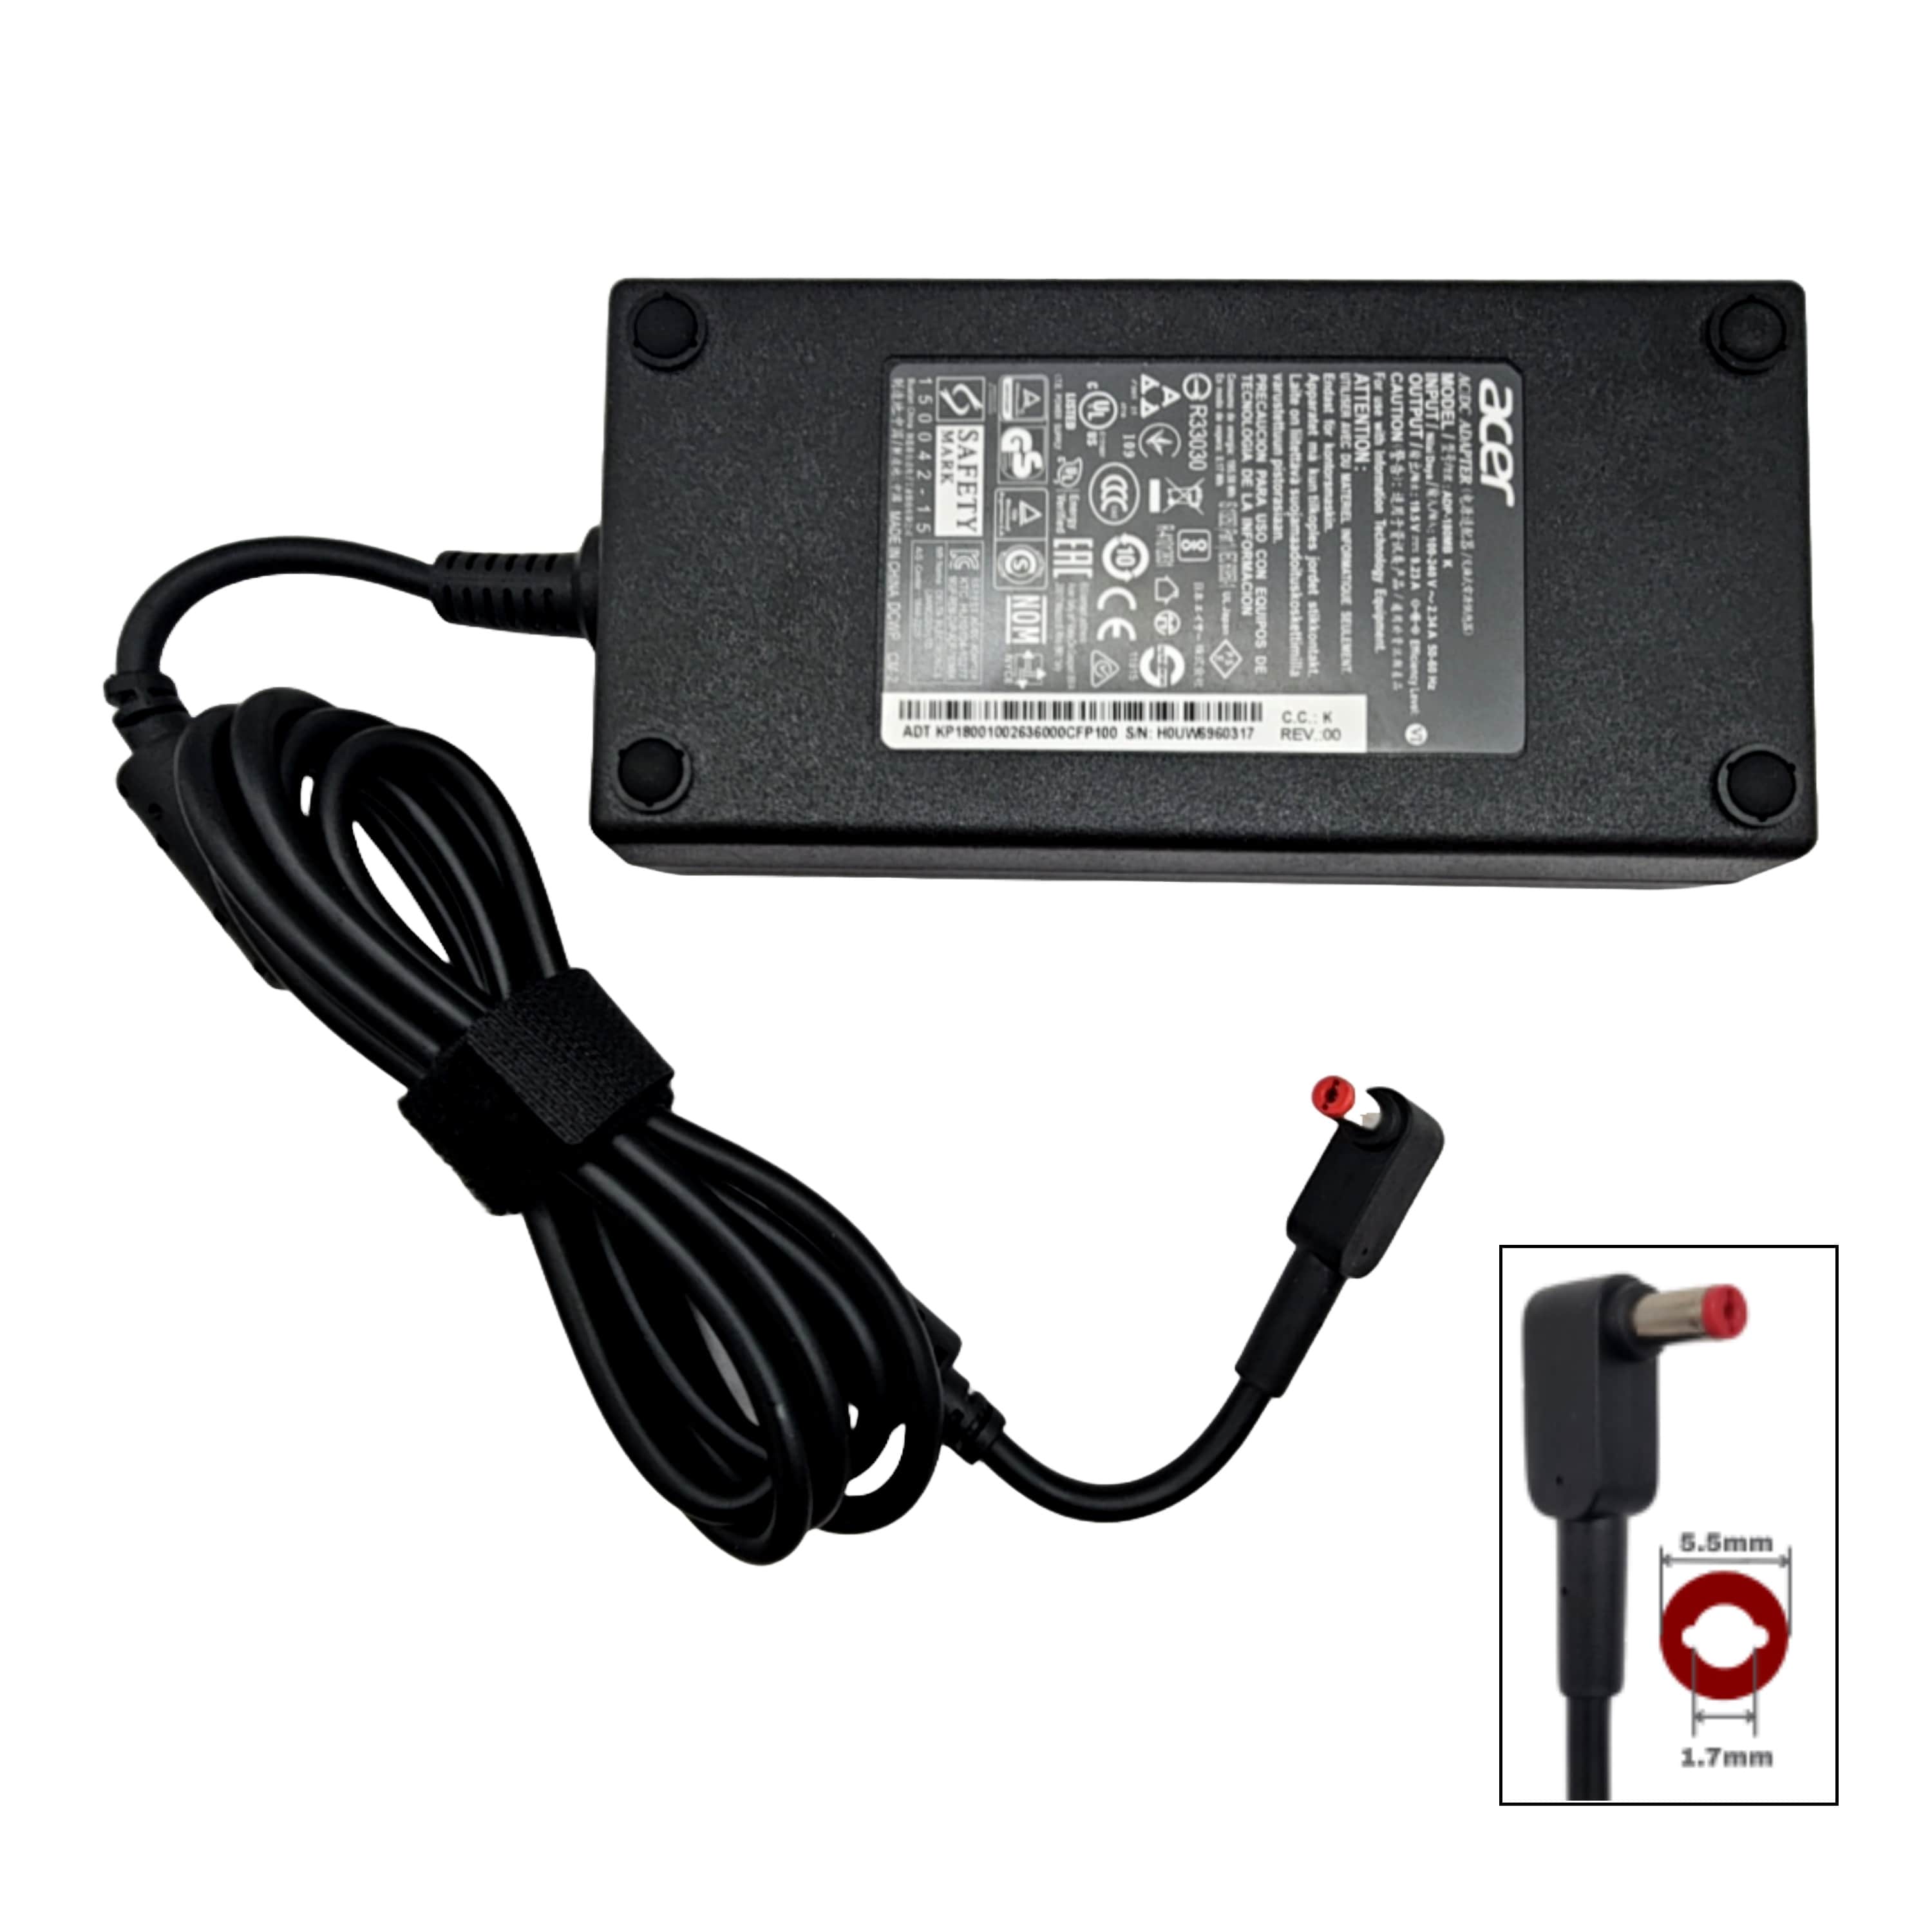 Acer Laptop Charger 180W 5.5mm - KP.18001.002